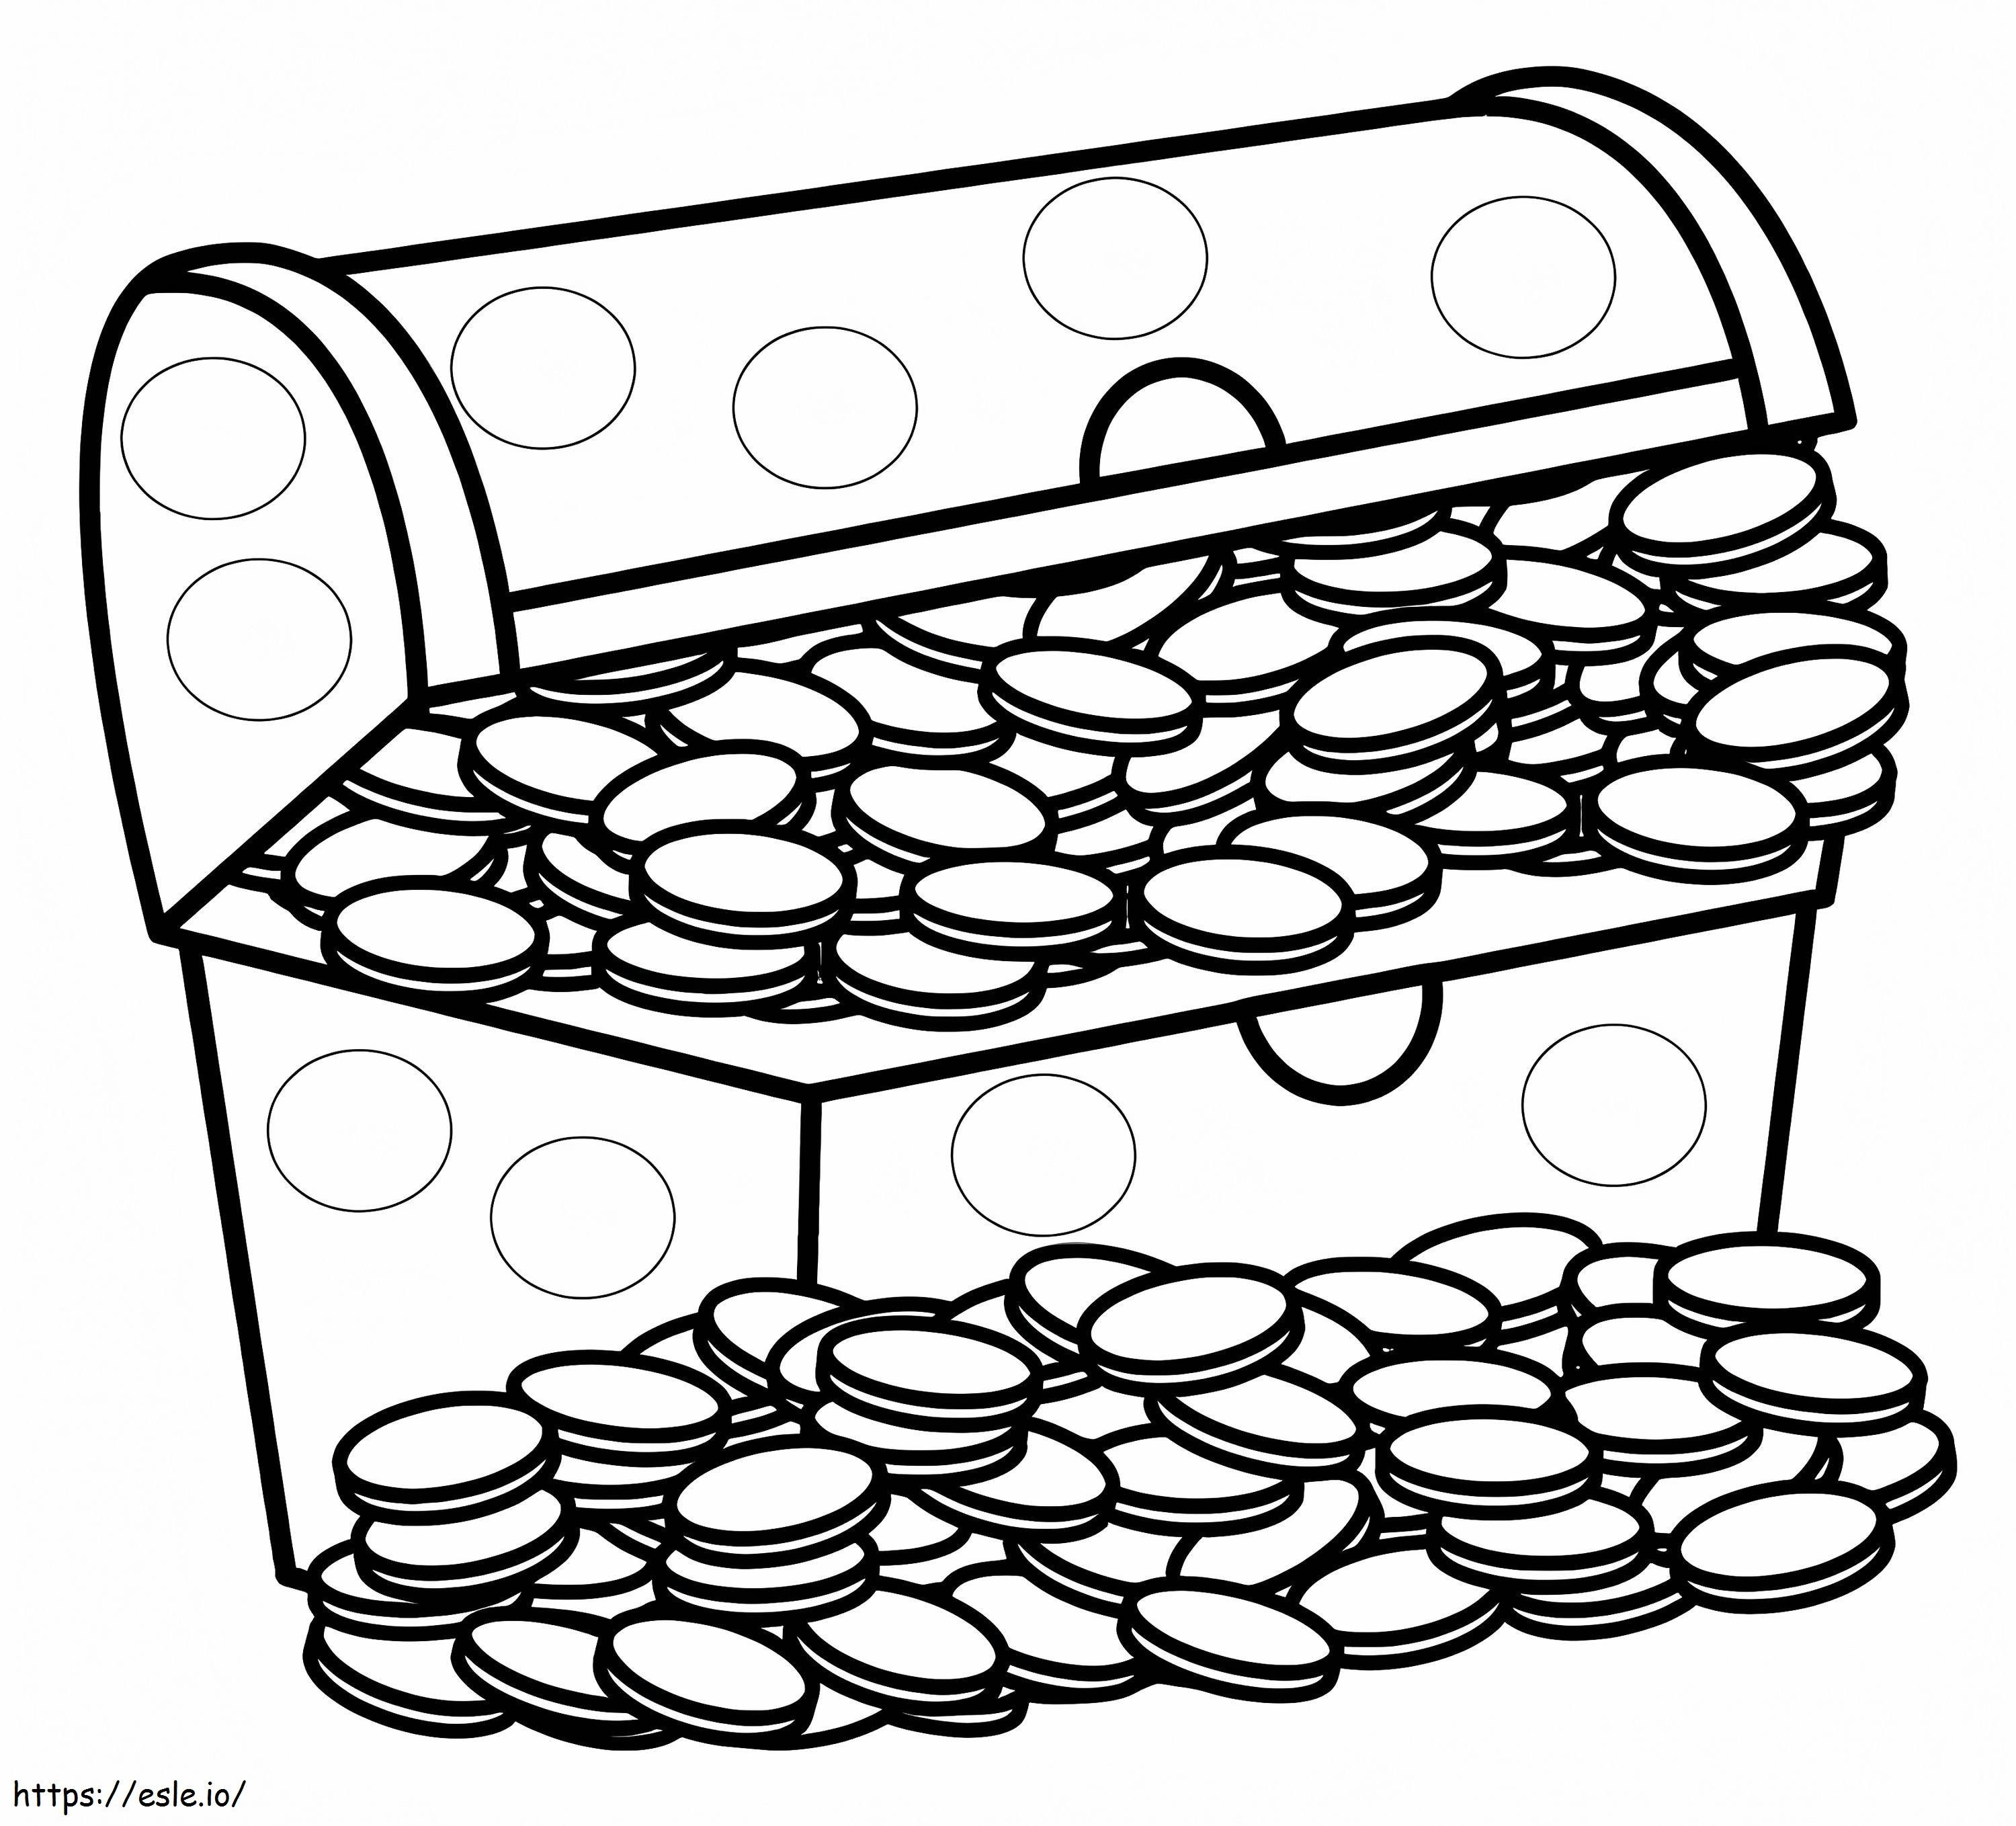 Treasure Chest With Gold Coin coloring page